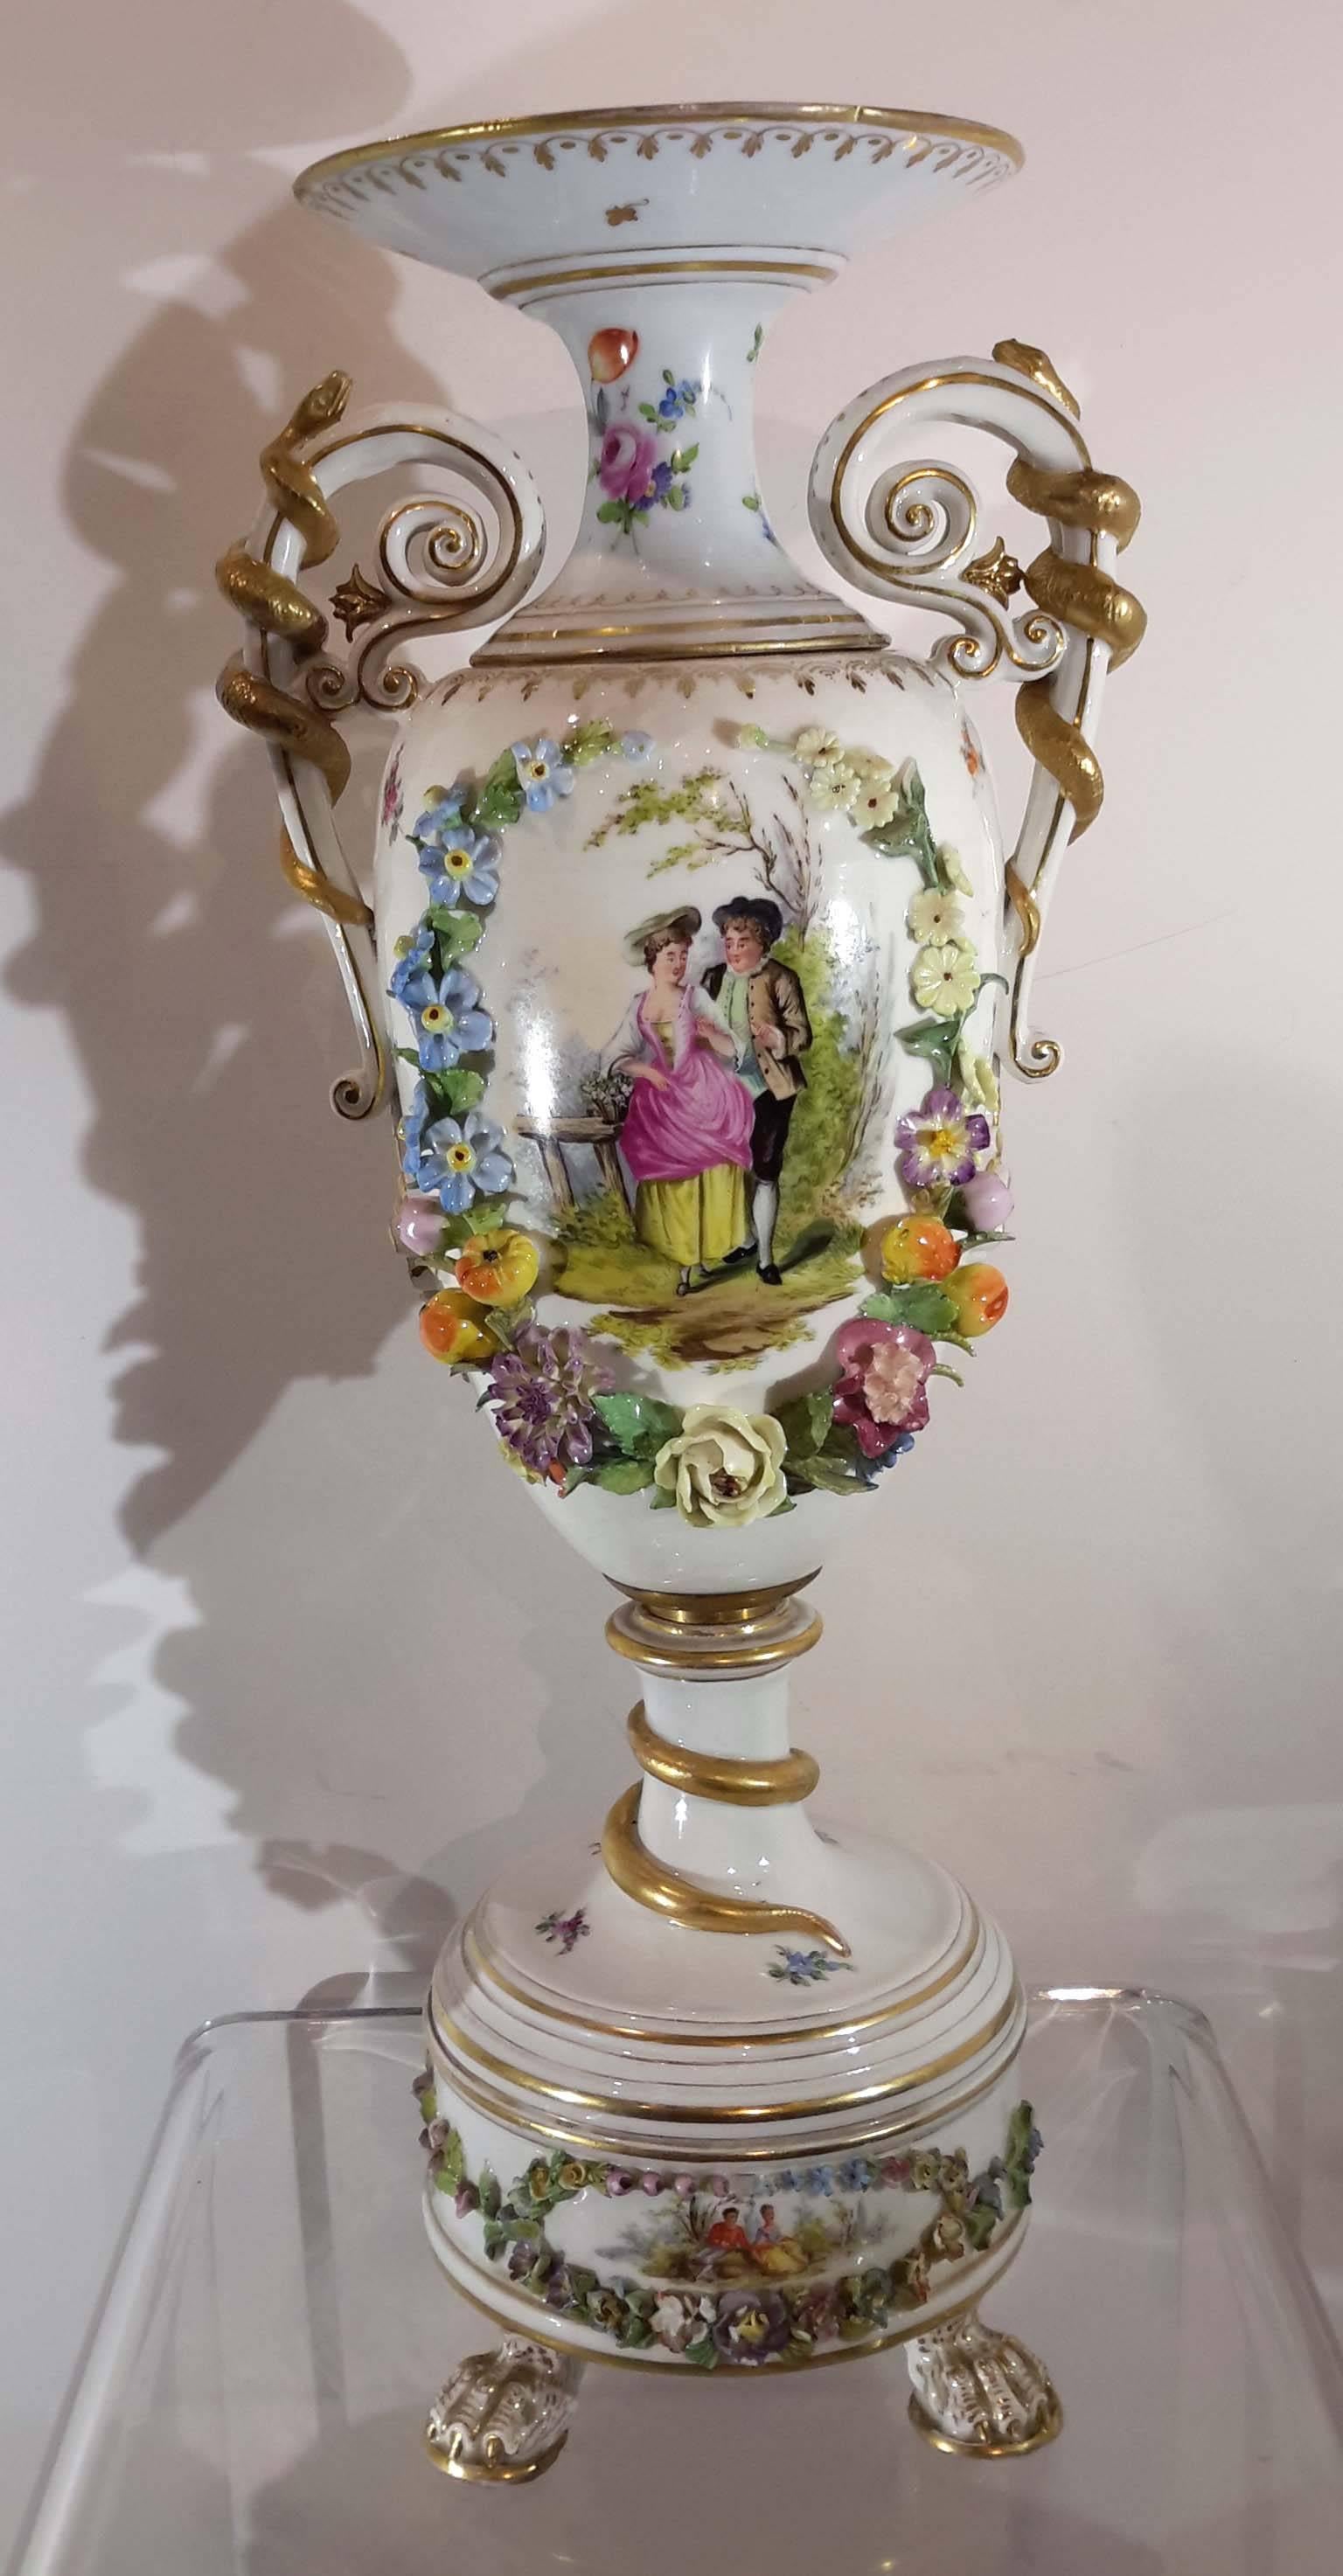 Neoclassical Revival Pair of Highly Decorated Carl Thieme Dresden Porcelain Vases, 19th Century For Sale